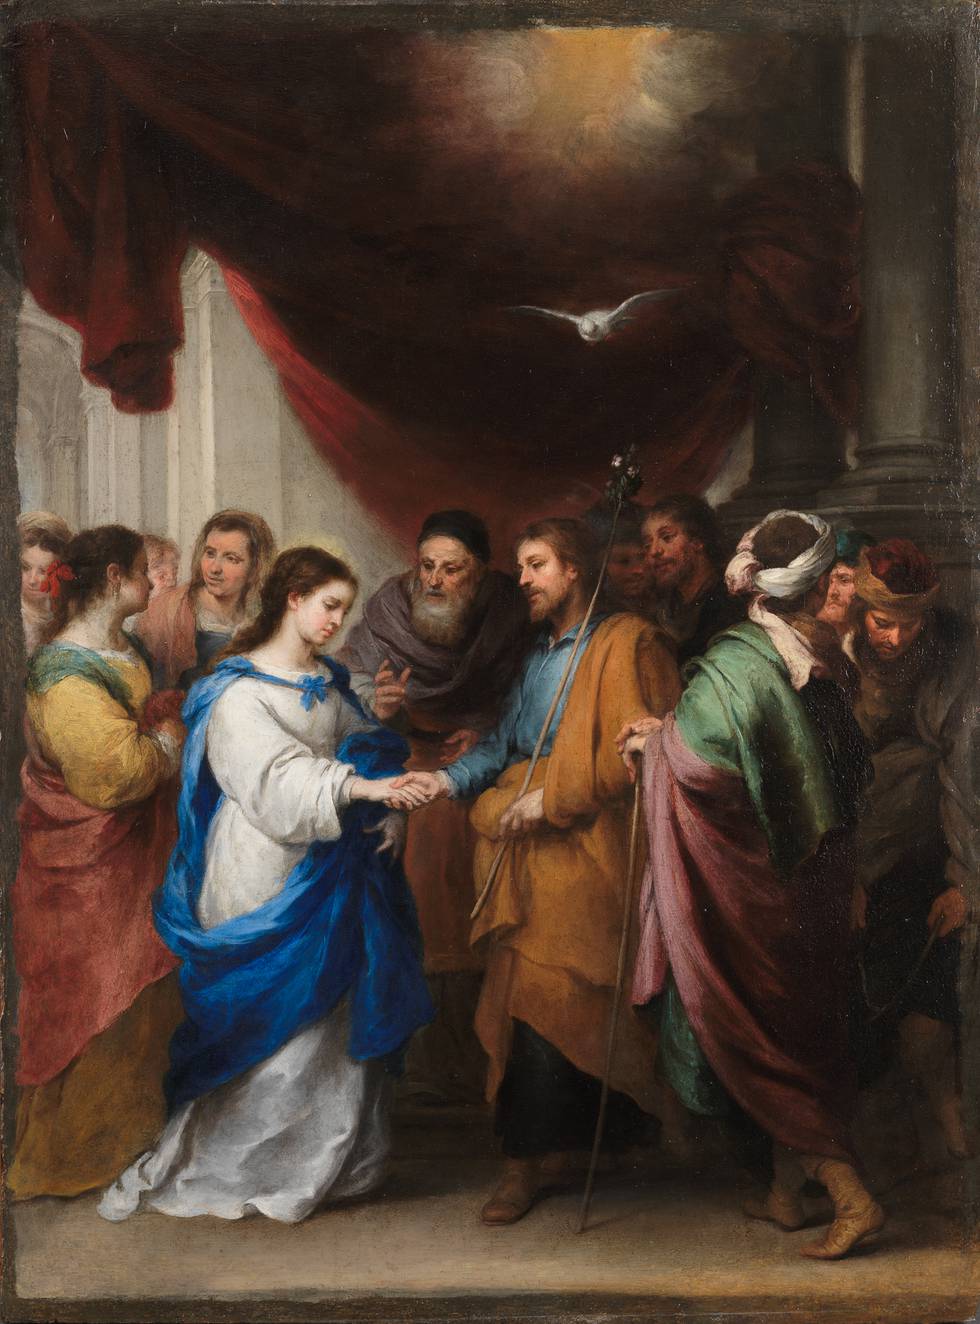 A painting of the Marriage of the Virgin